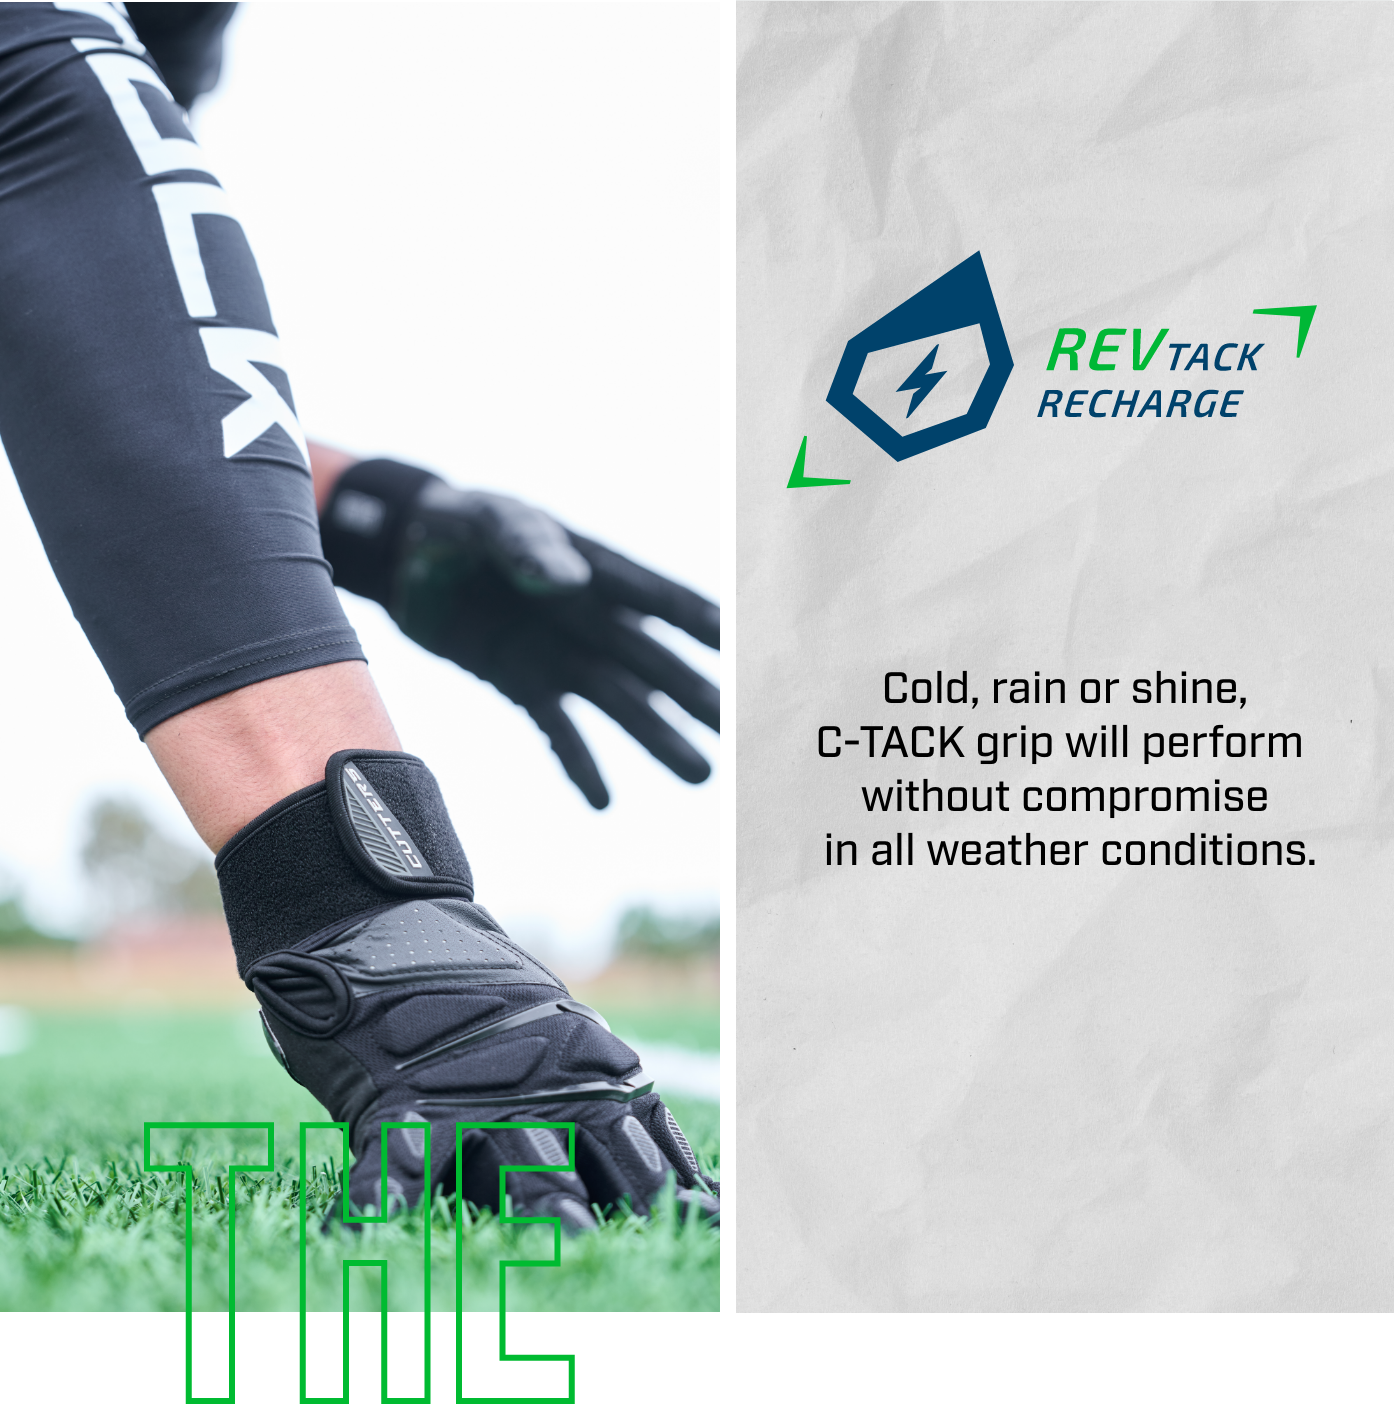 THE | Rev Tack Recharge - Cold, rain or shine, C-TACK grip will perform without compromise in all weather conditions.